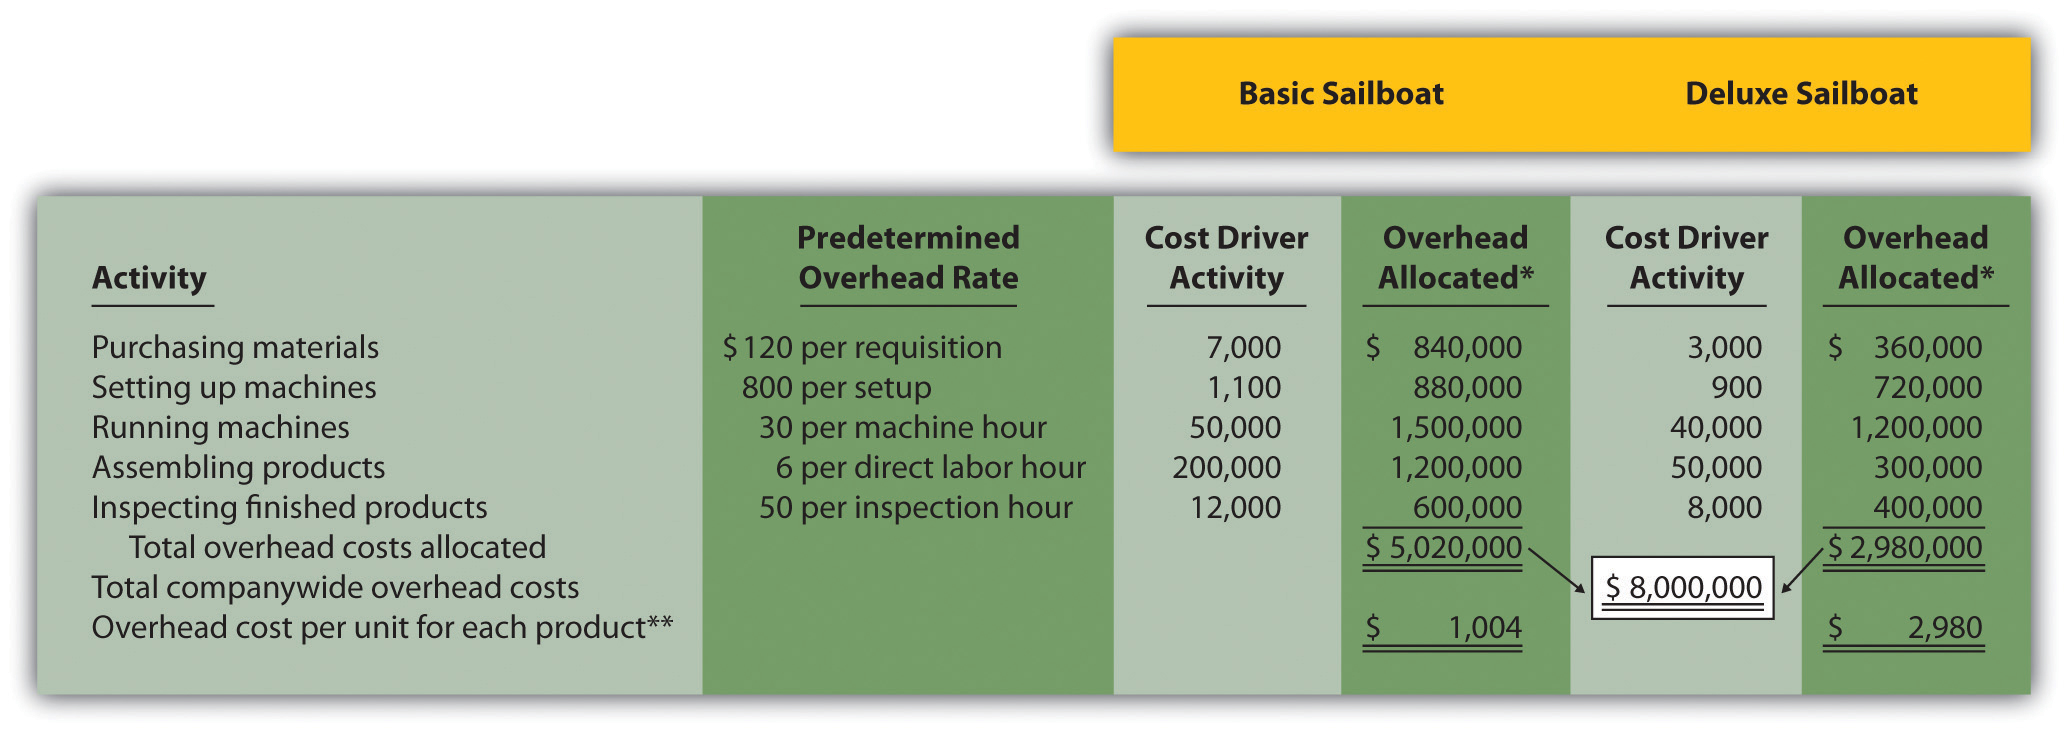 Cost Drivers Examples In Service Industry